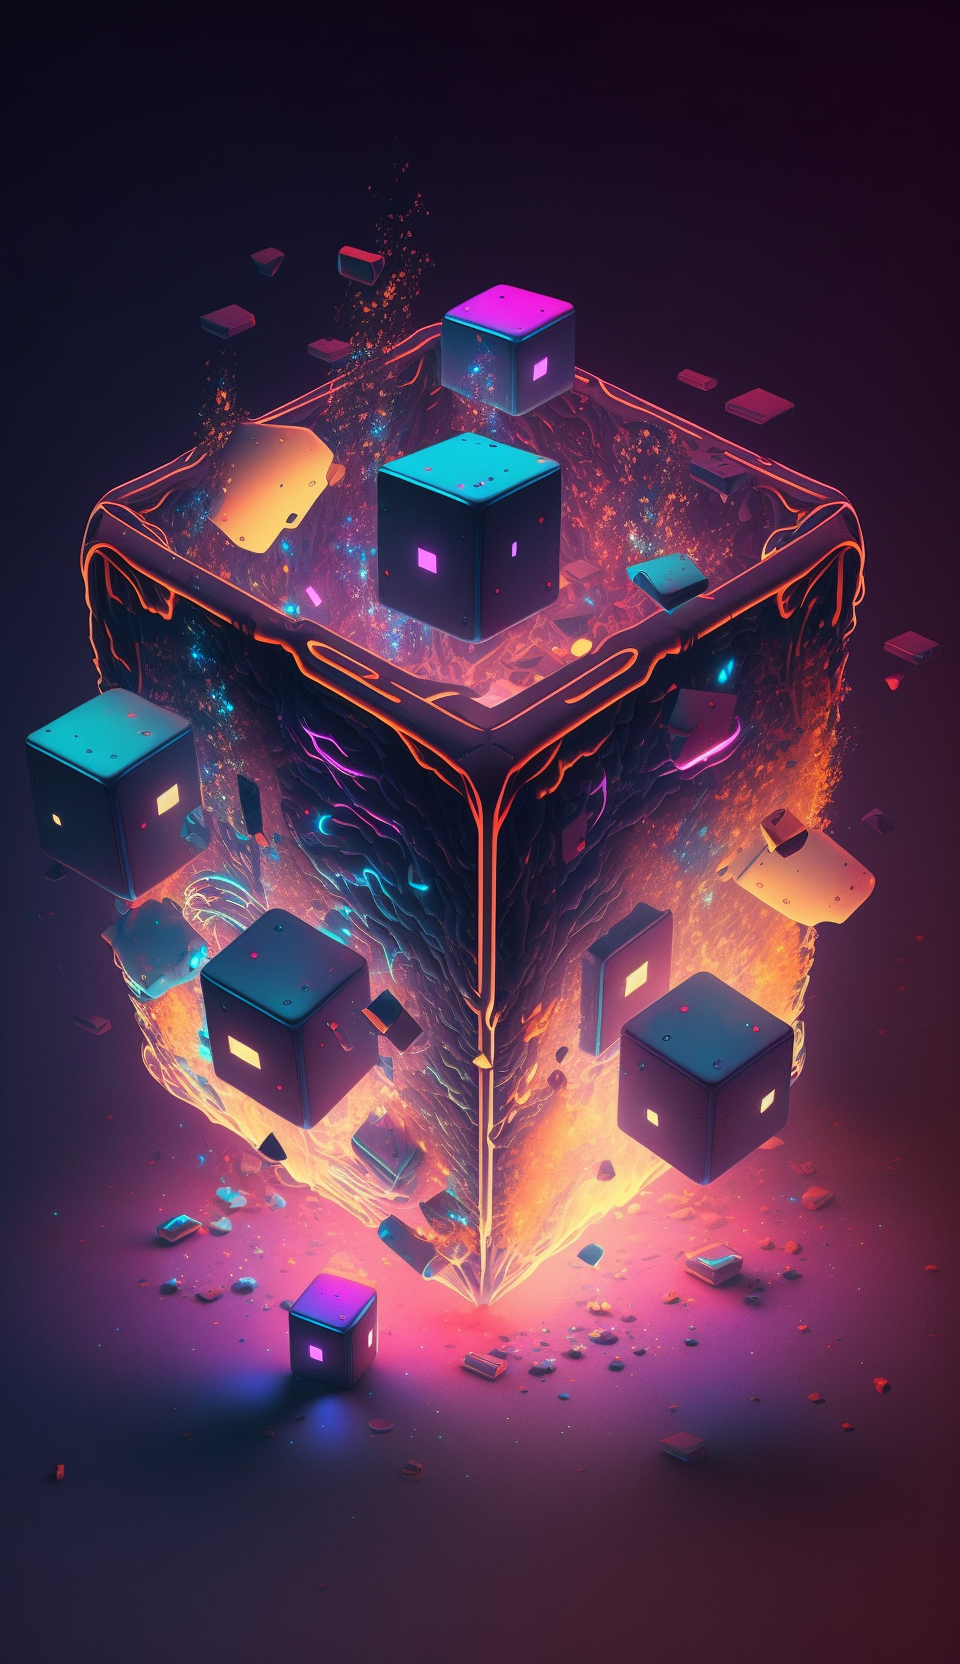 soupcan13_floating_hyper_detailed_mechanical_cubes_surrounded_b_de149c5a-be71-470c-b744-f3457a877849.png